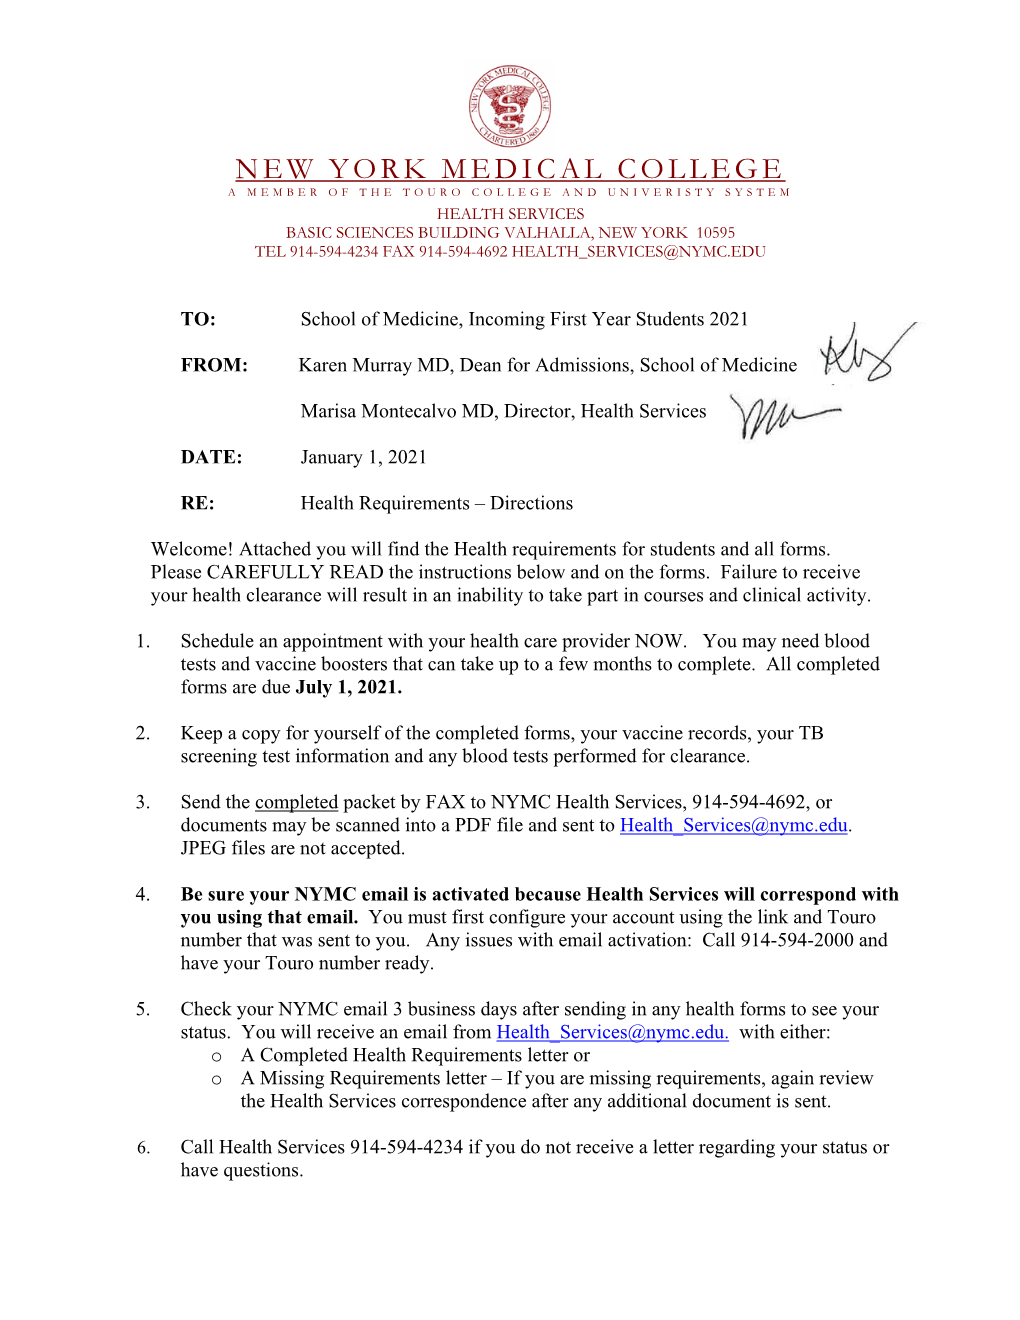 NYMC Health Services, 914-594-4692, Or Documents May Be Scanned Into a PDF File and Sent to Health Services@Nymc.Edu